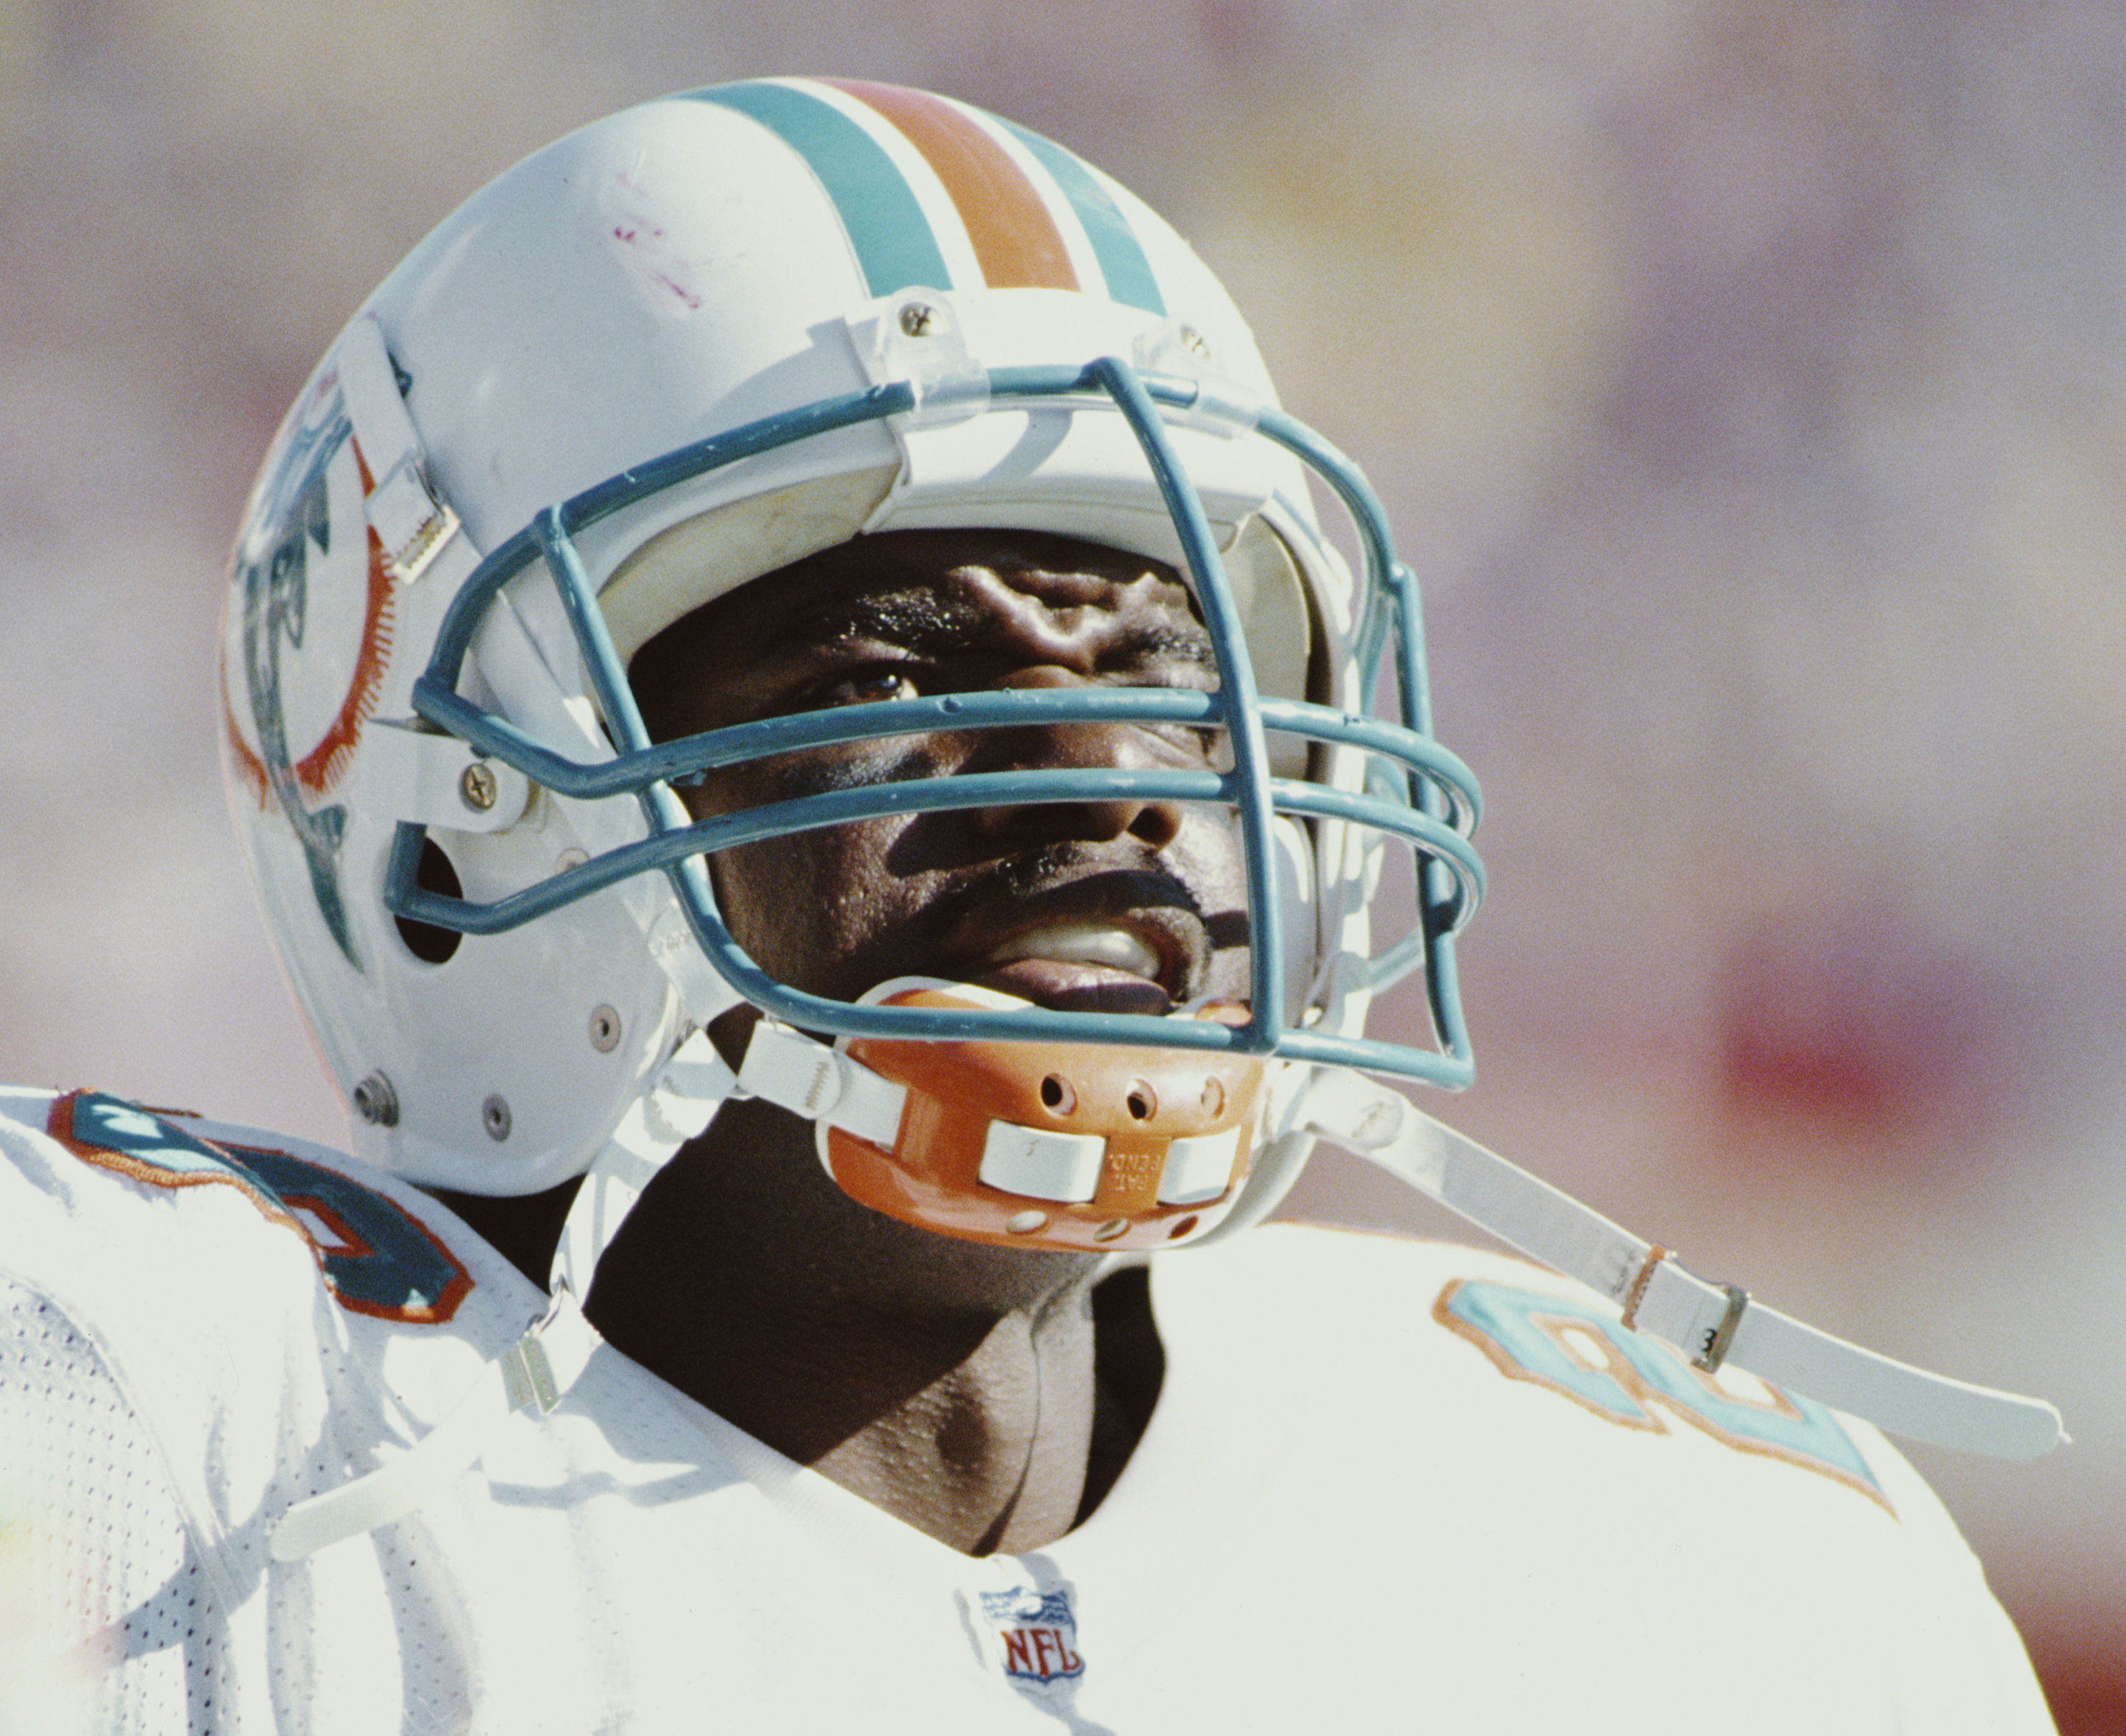 Miami Dolphins safety Gene Atkins looks ahead during a game against the Buffalo Bills from the 1994 NFL season.